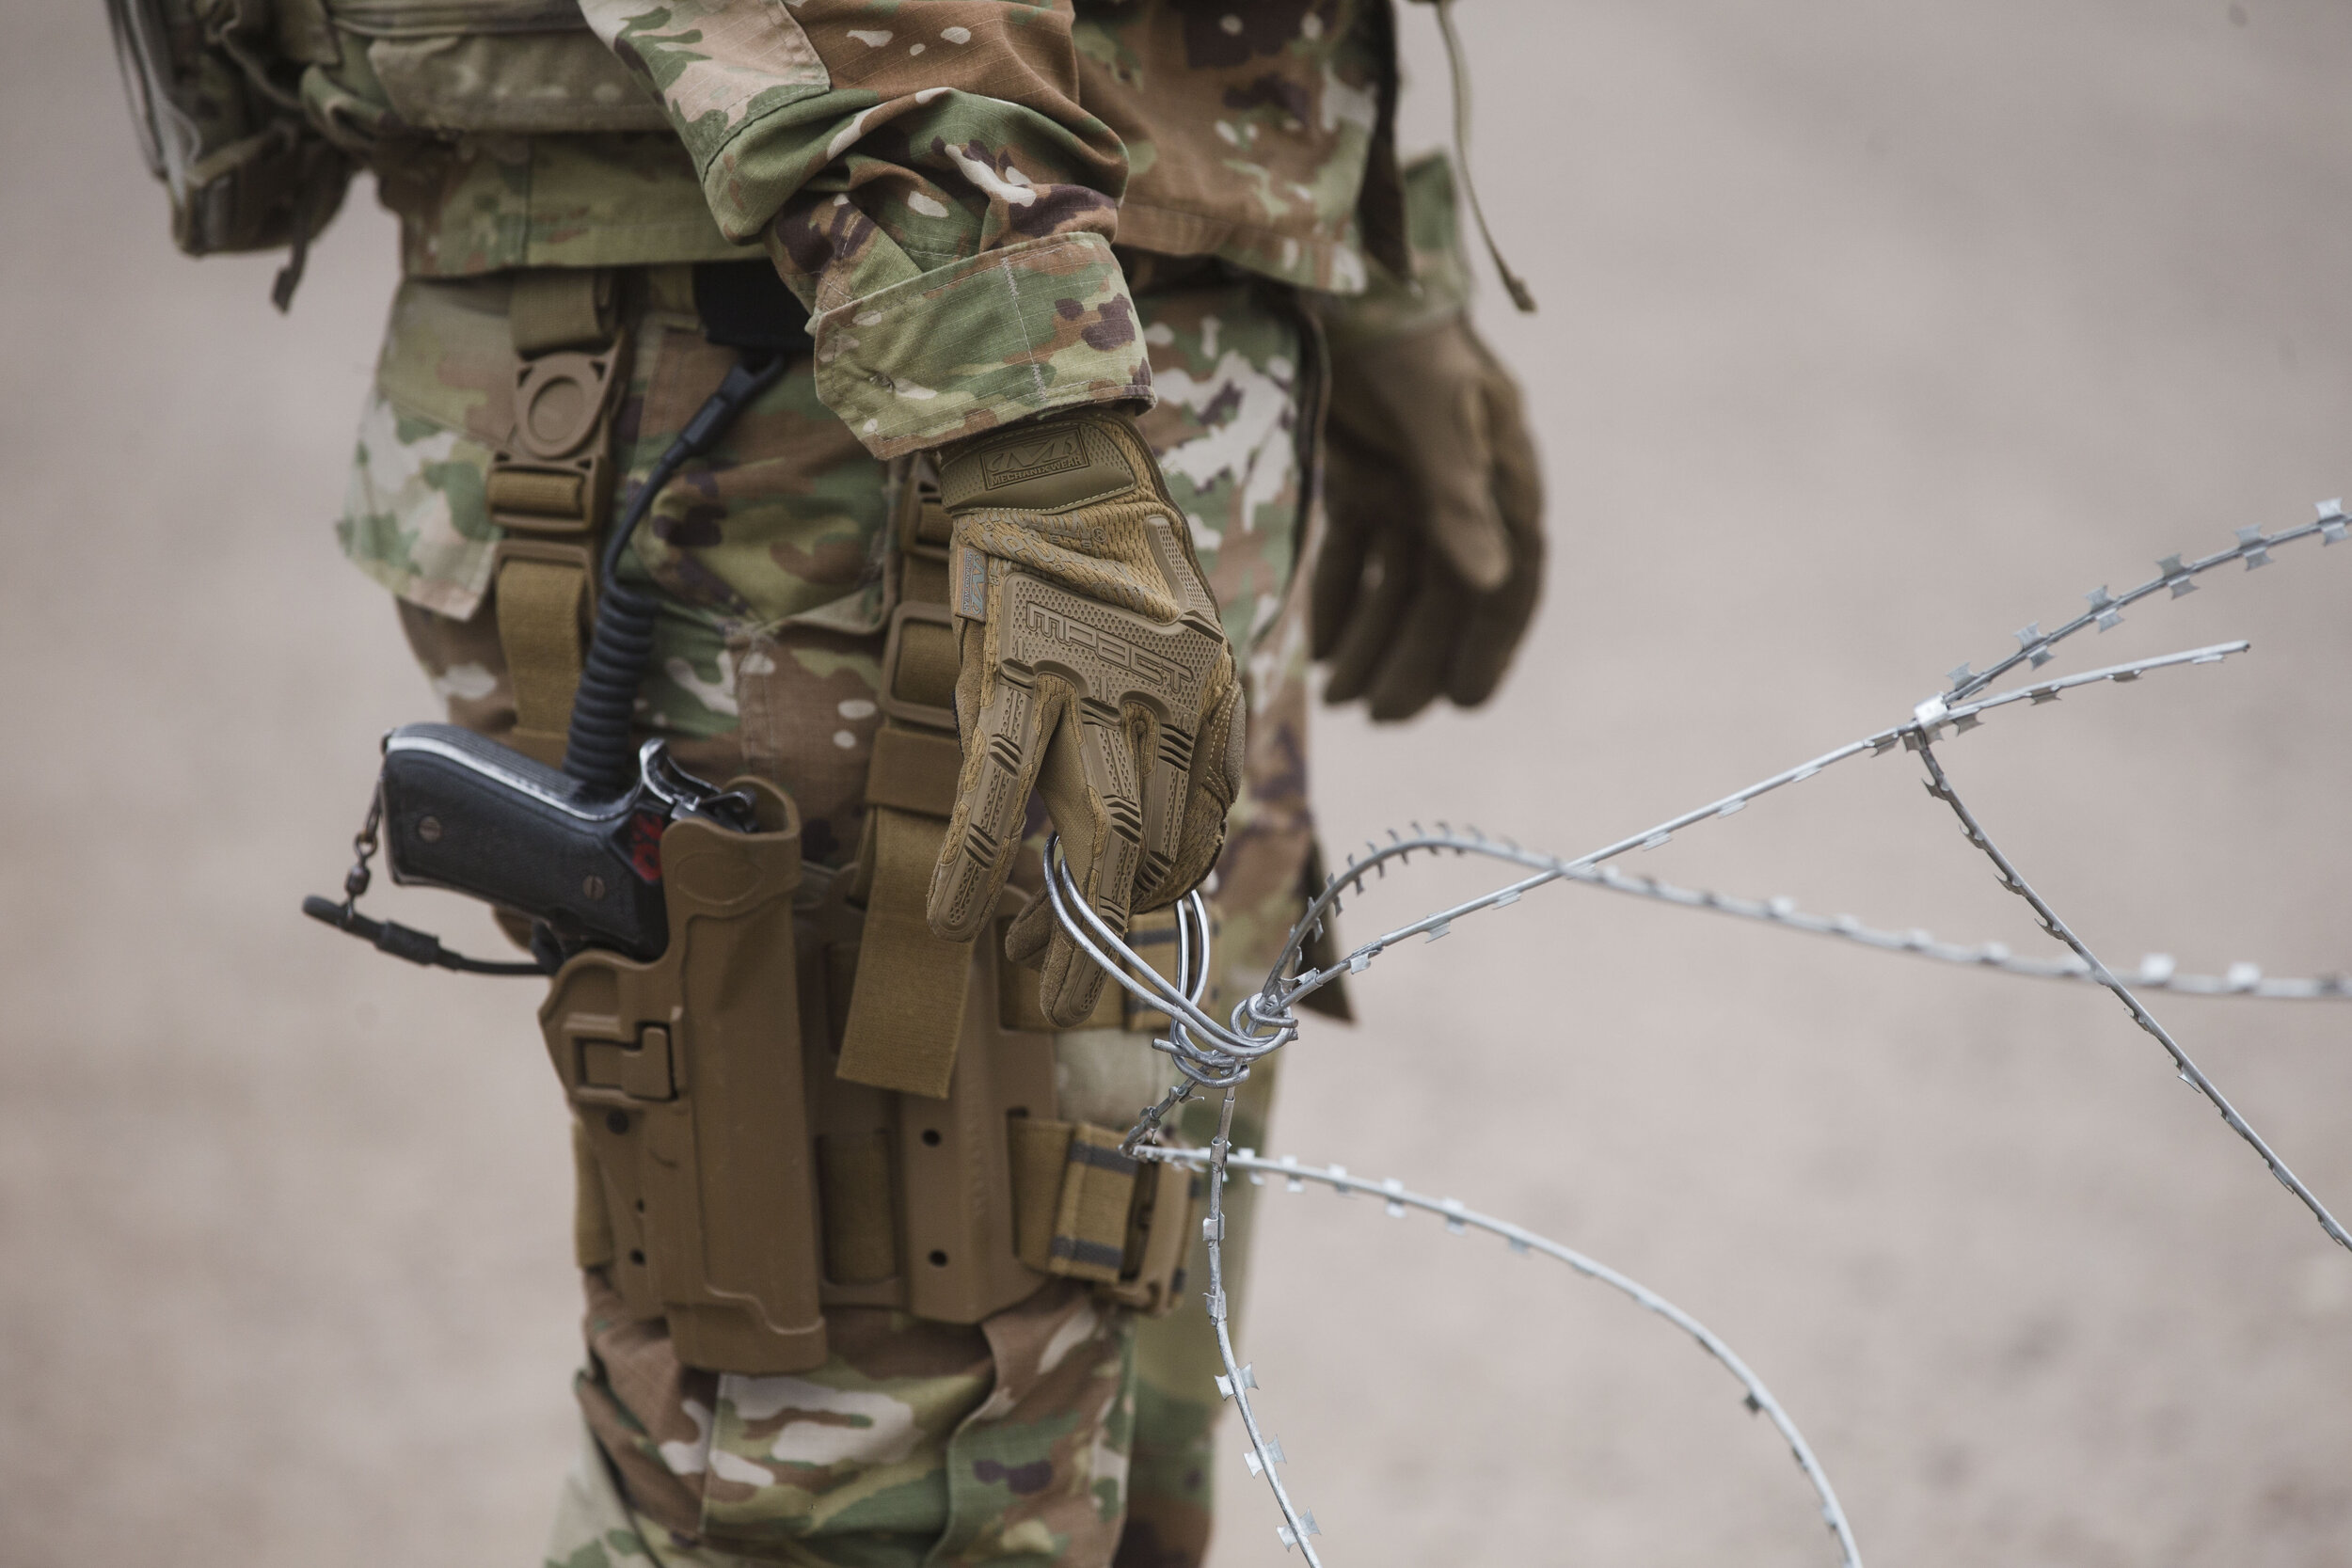  U.S. Army troops deployed to the U.S.-Mexico border in Texas set up a Military camp at the old Craig's Furniture in Weslaco, TX. Army personal use barbed wire as barrier gate at the entrance to the camp on Wednesday, Dec. 5, 2018. Defense Secretary 